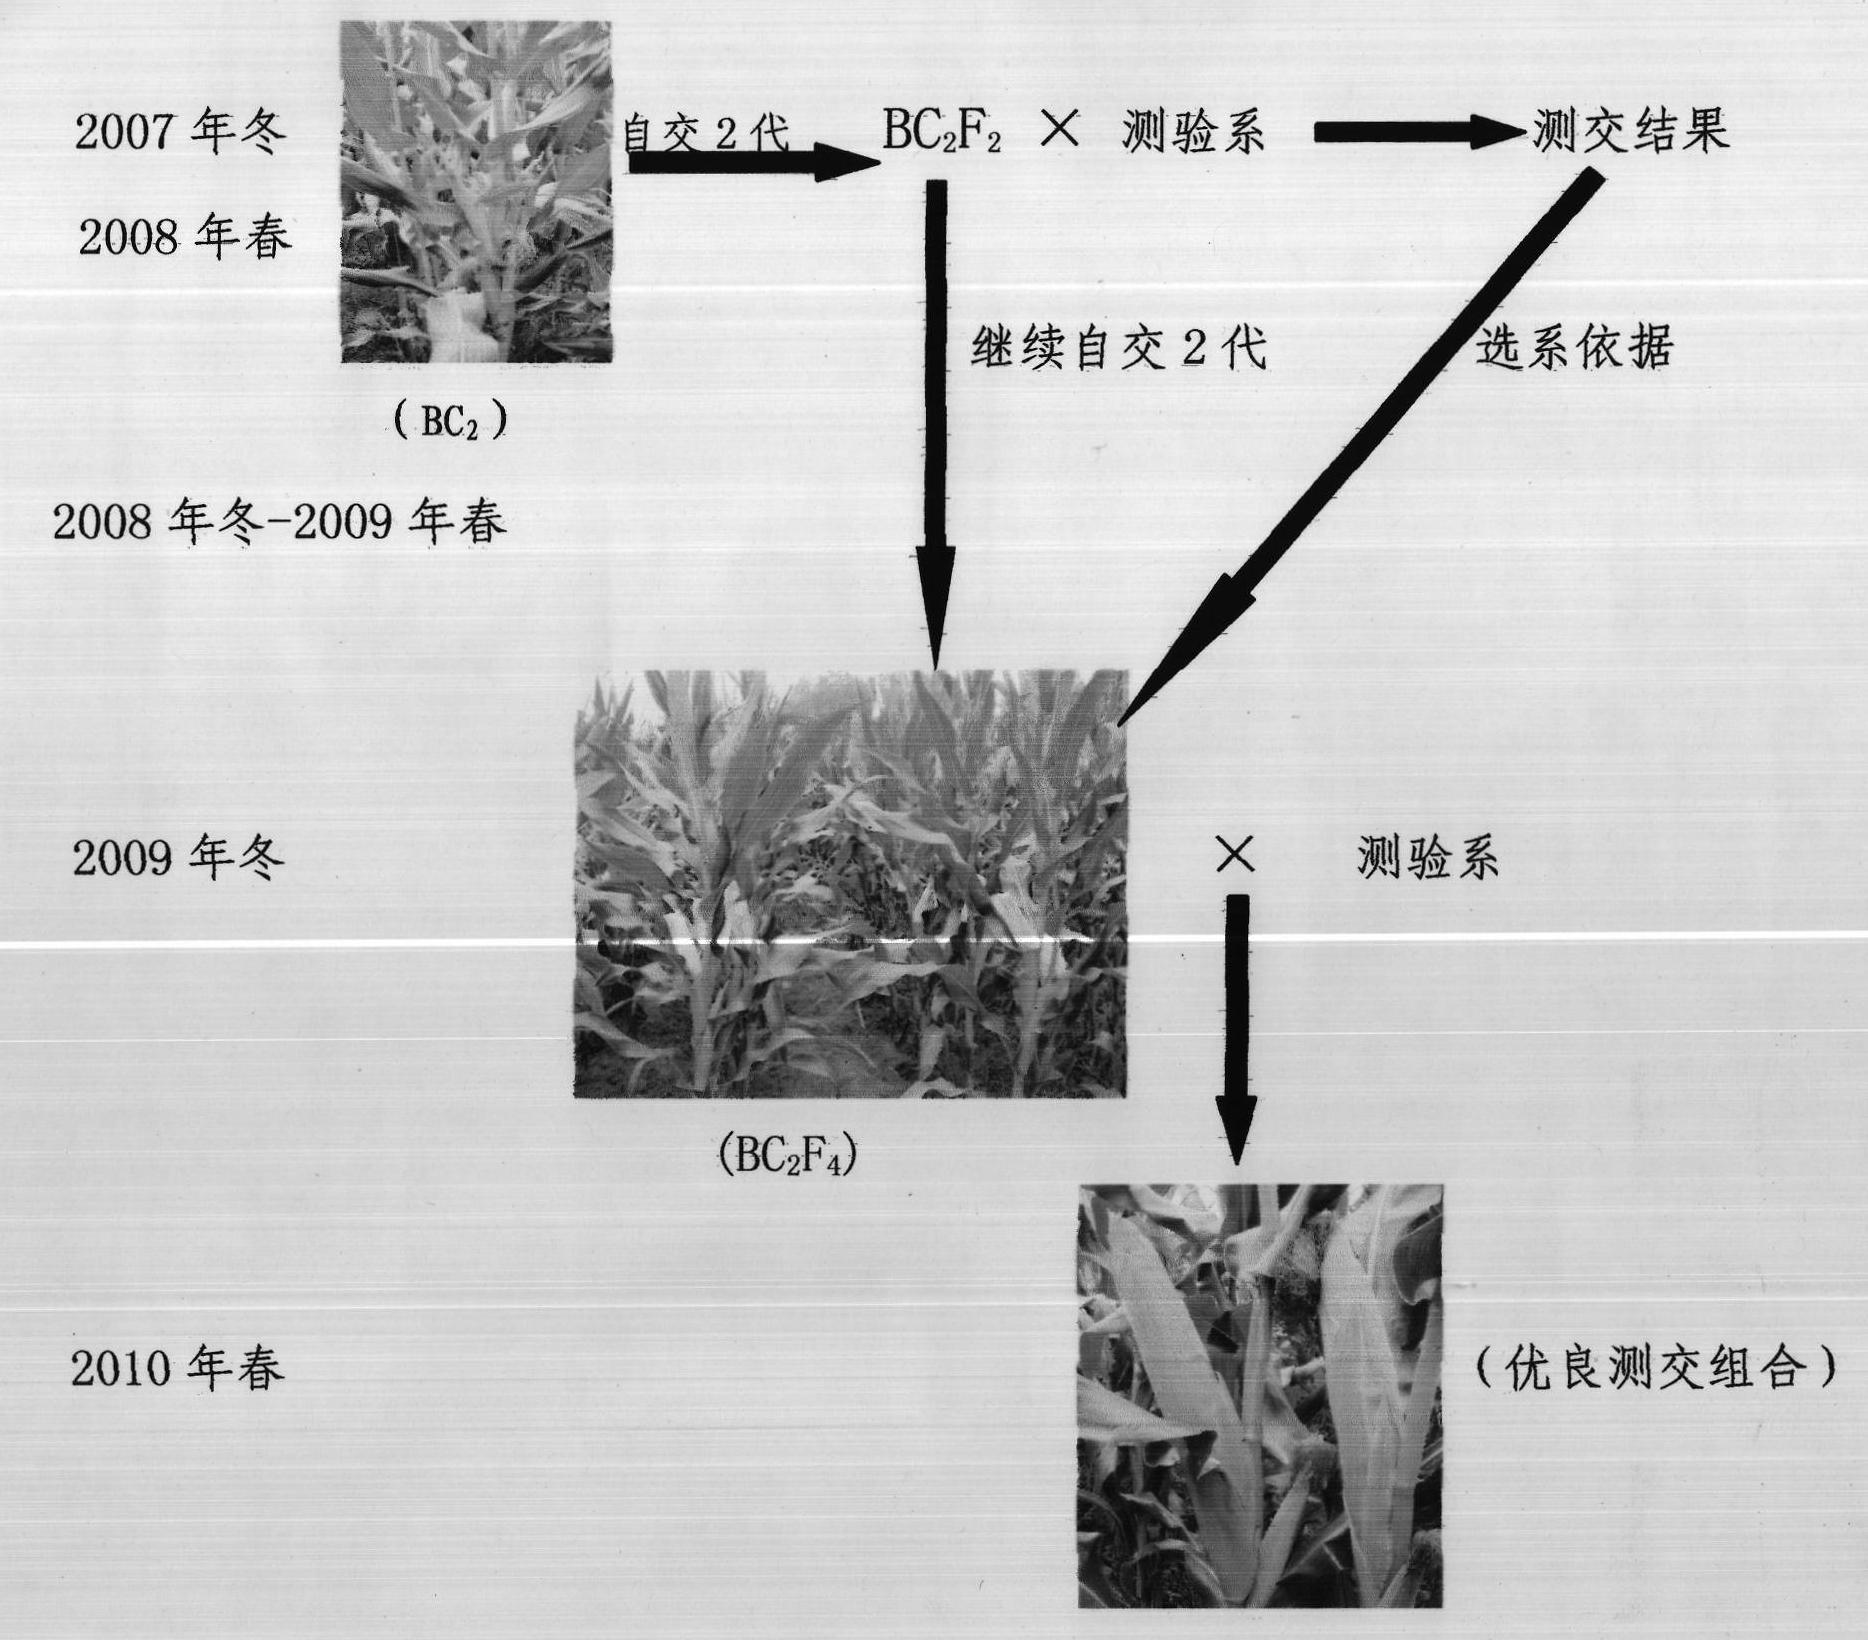 Method for creating common maize inbred-line by introducing teosintes in maize cultivated specie